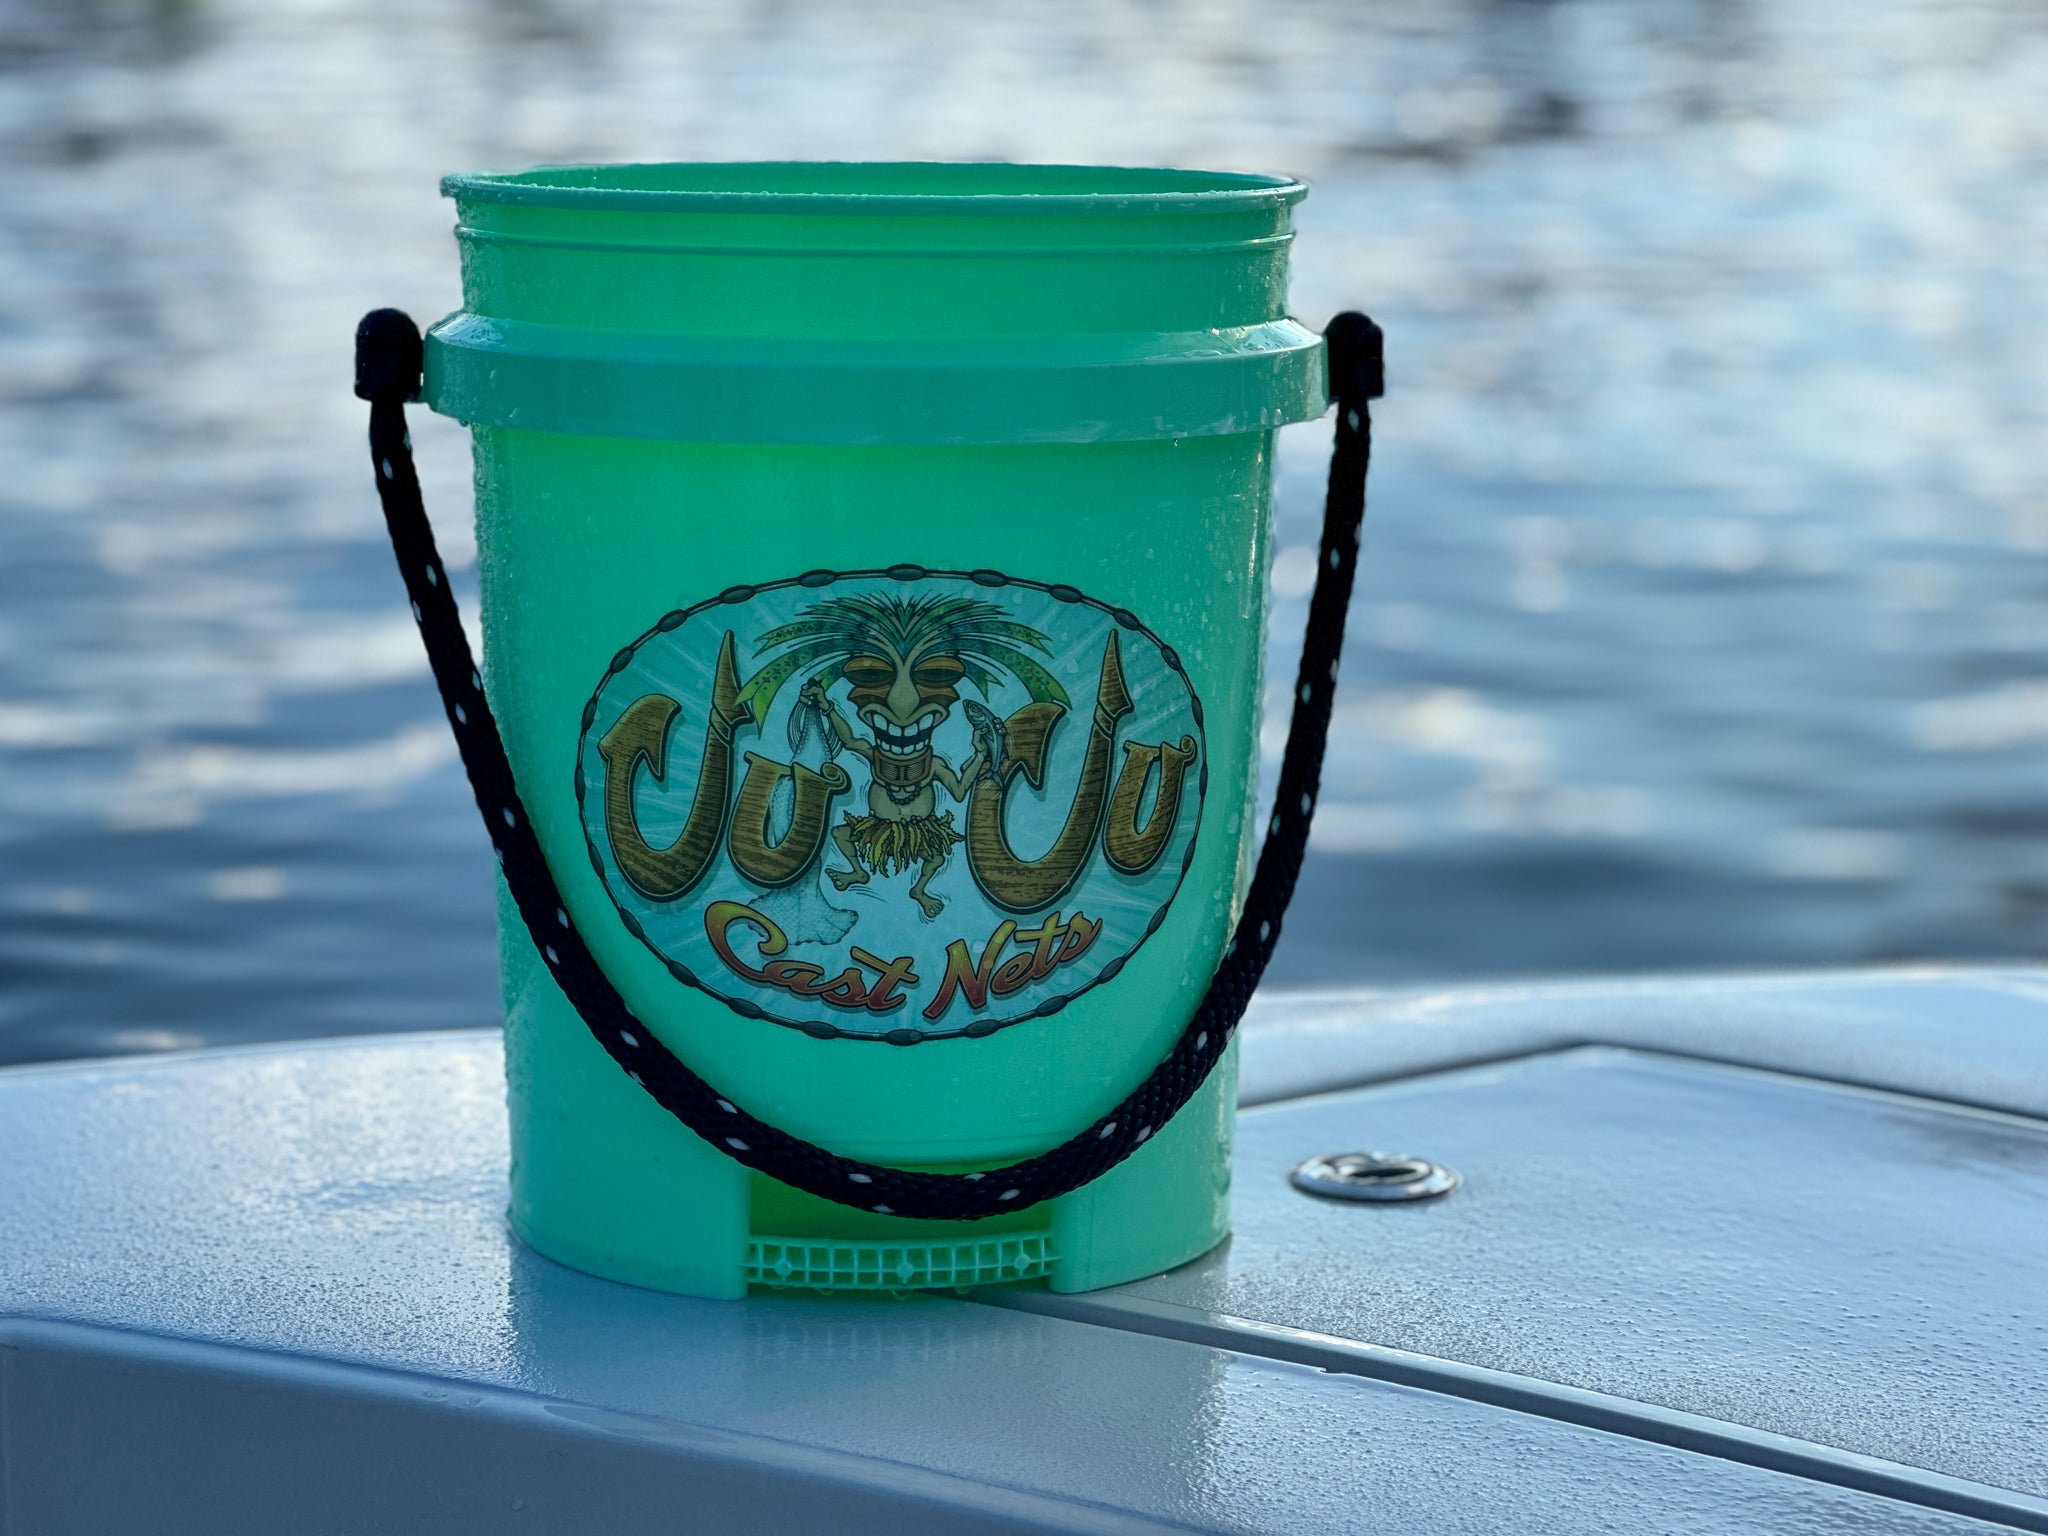 World's Best 5 Gallon Fishing Bucket with Rope Handle –